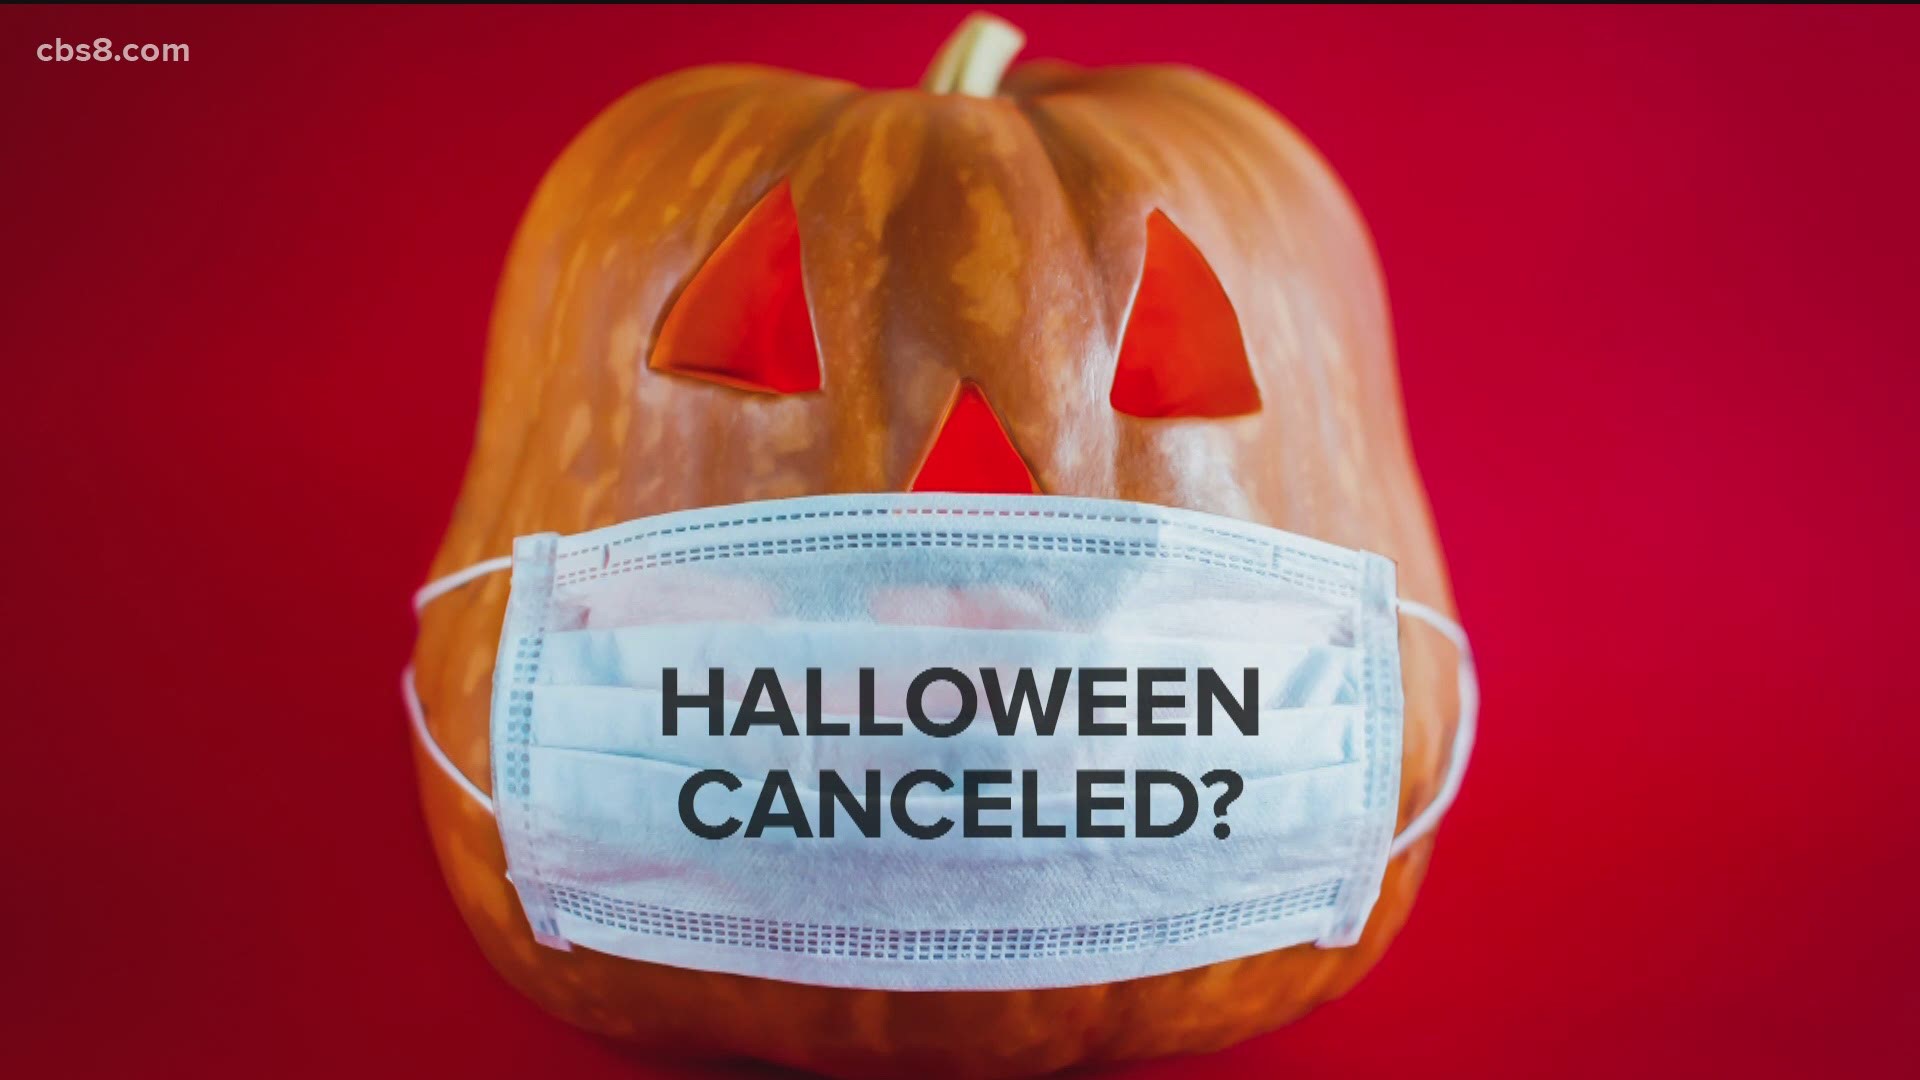 One Carlsbad mom said Halloween is "magical" but will that be the same this year? The county is awaiting CDC guidelines.